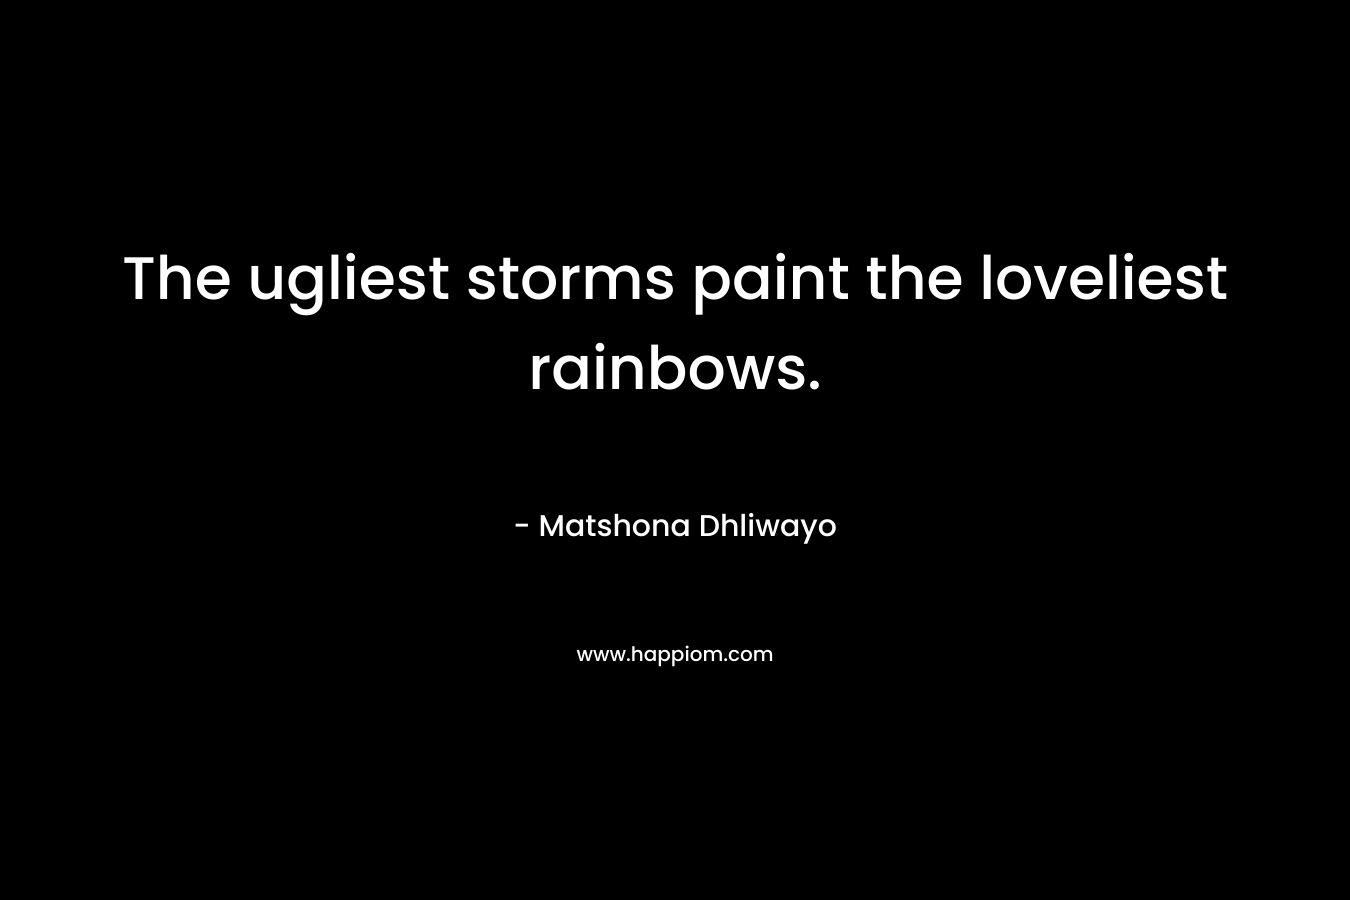 The ugliest storms paint the loveliest rainbows.